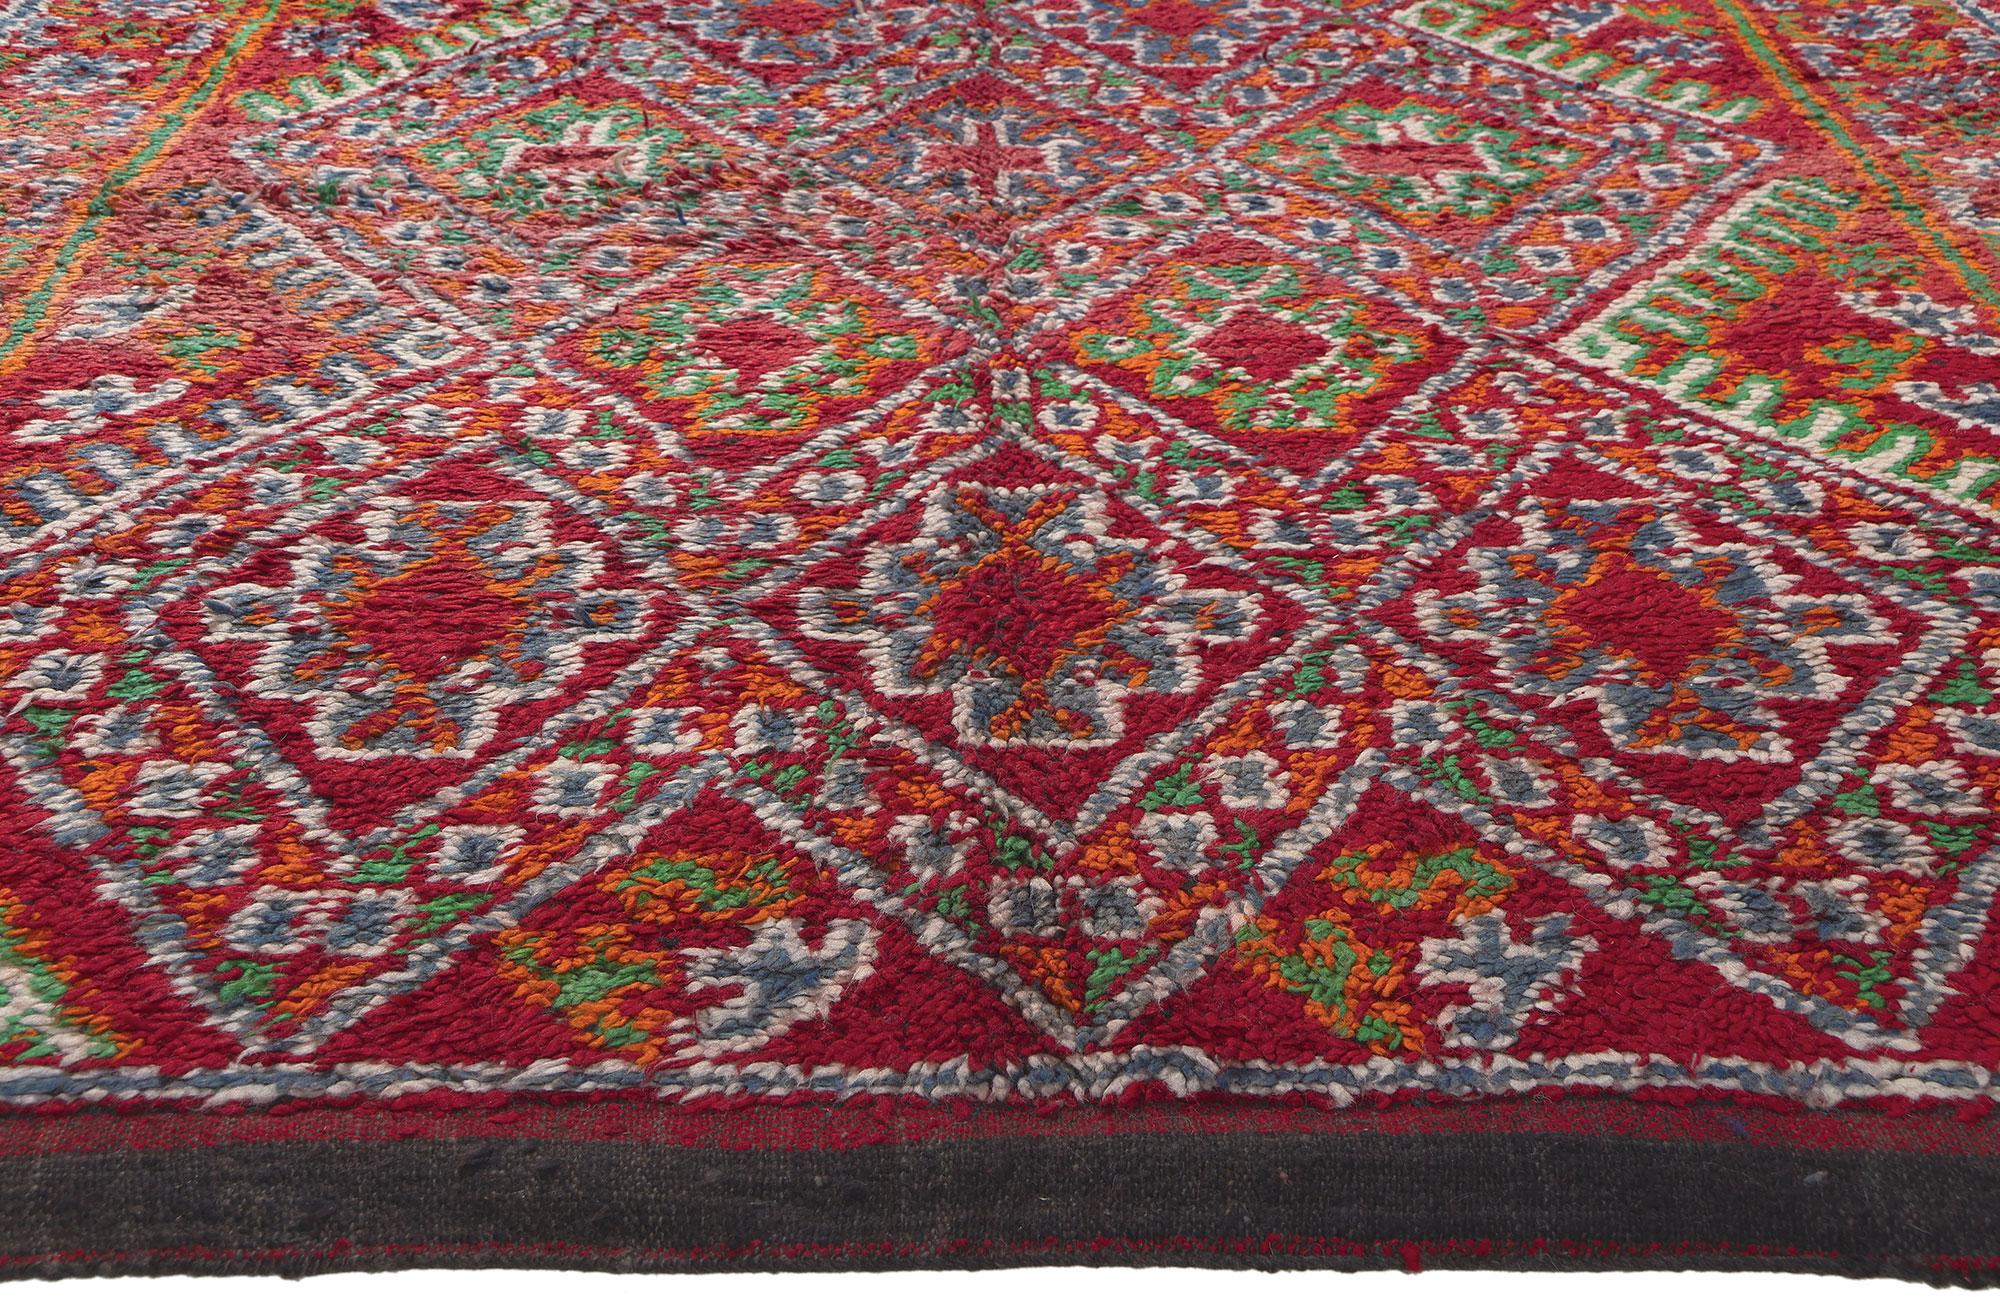 Hand-Knotted Vintage Red Beni MGuild Moroccan Rug, Midcentury Modern Meets Tribal Enchantment For Sale